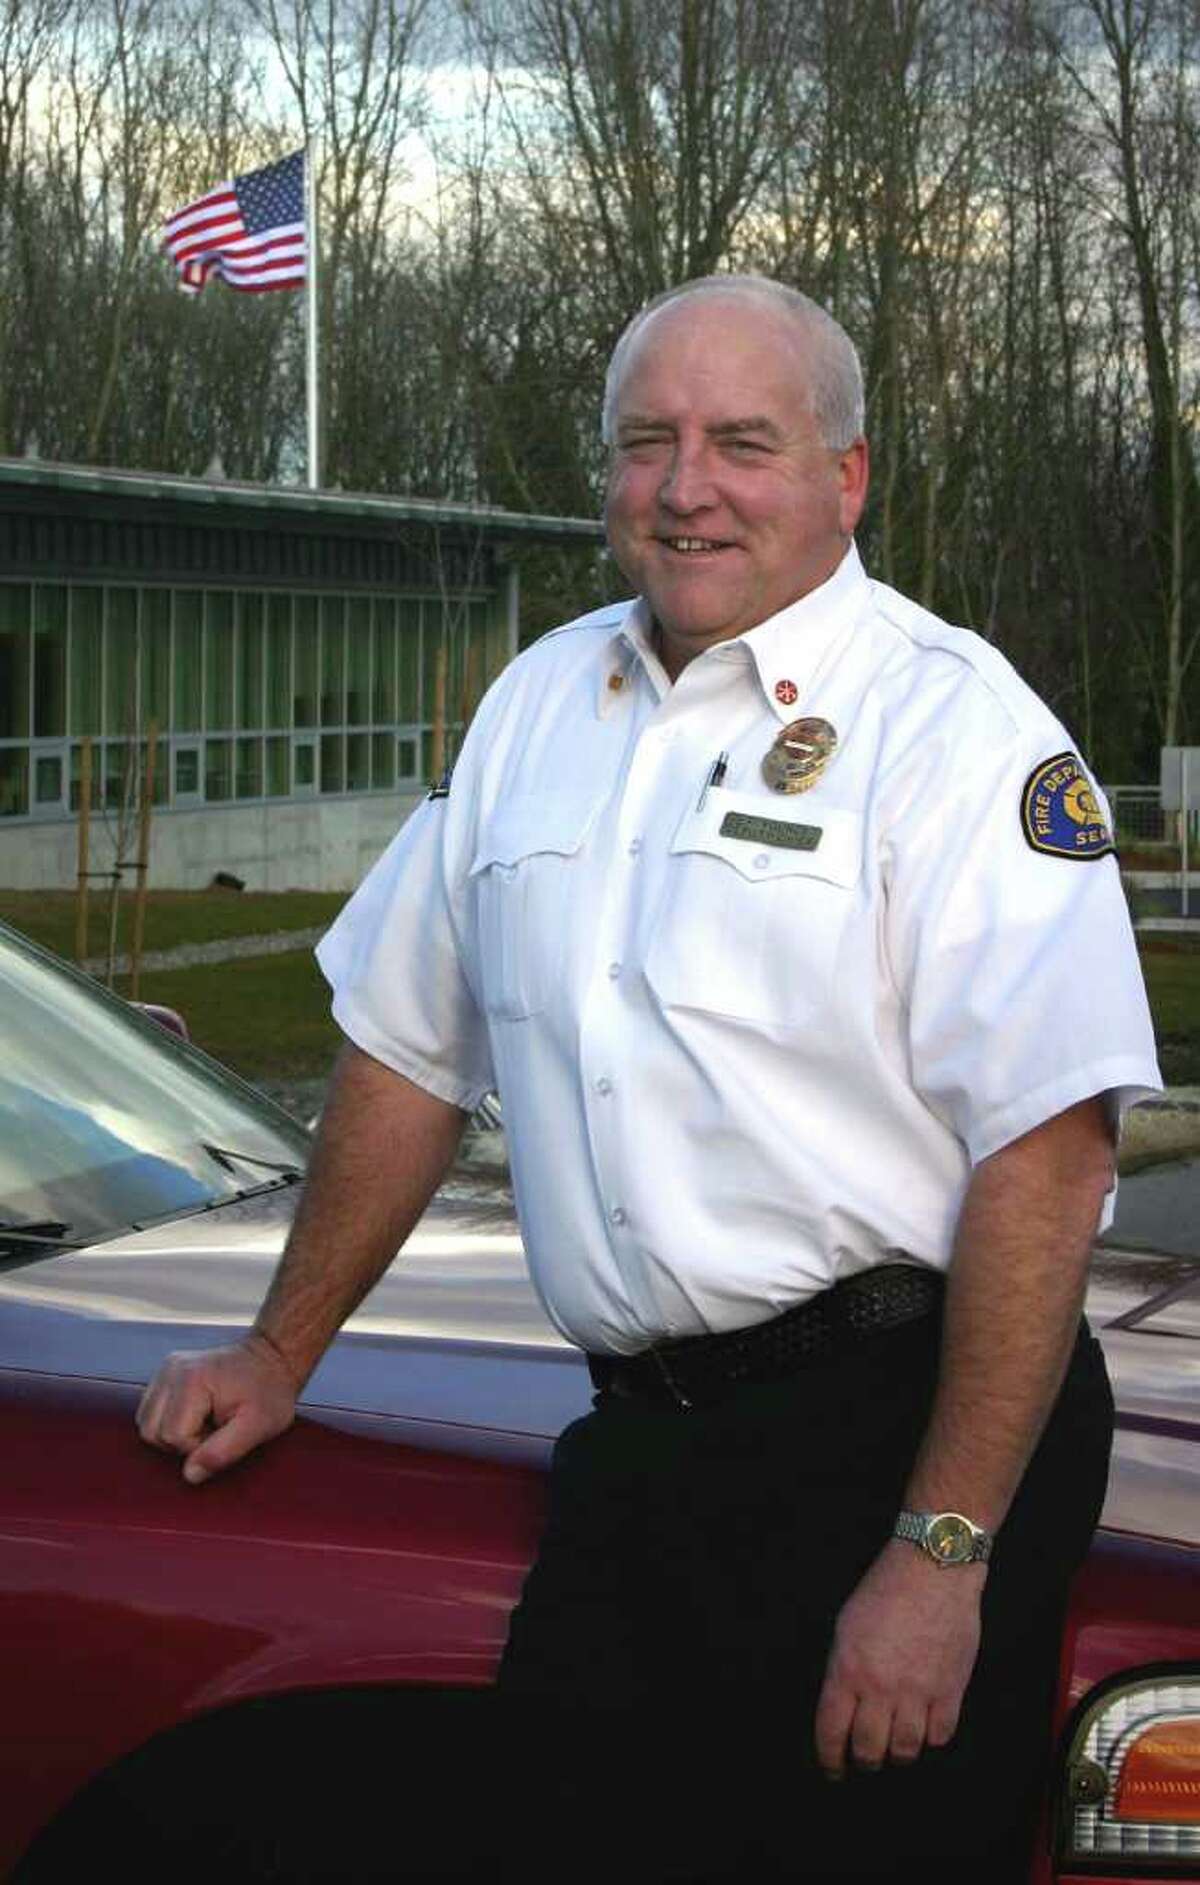 Seattle Fire Department Deputy Chief Jesse Youngs, selected by fellow firefighters as Chief of the Year in 2007, died of duty-related cancer Oct. 22, 2010 at age 53. He was honored at a Friday memorial.